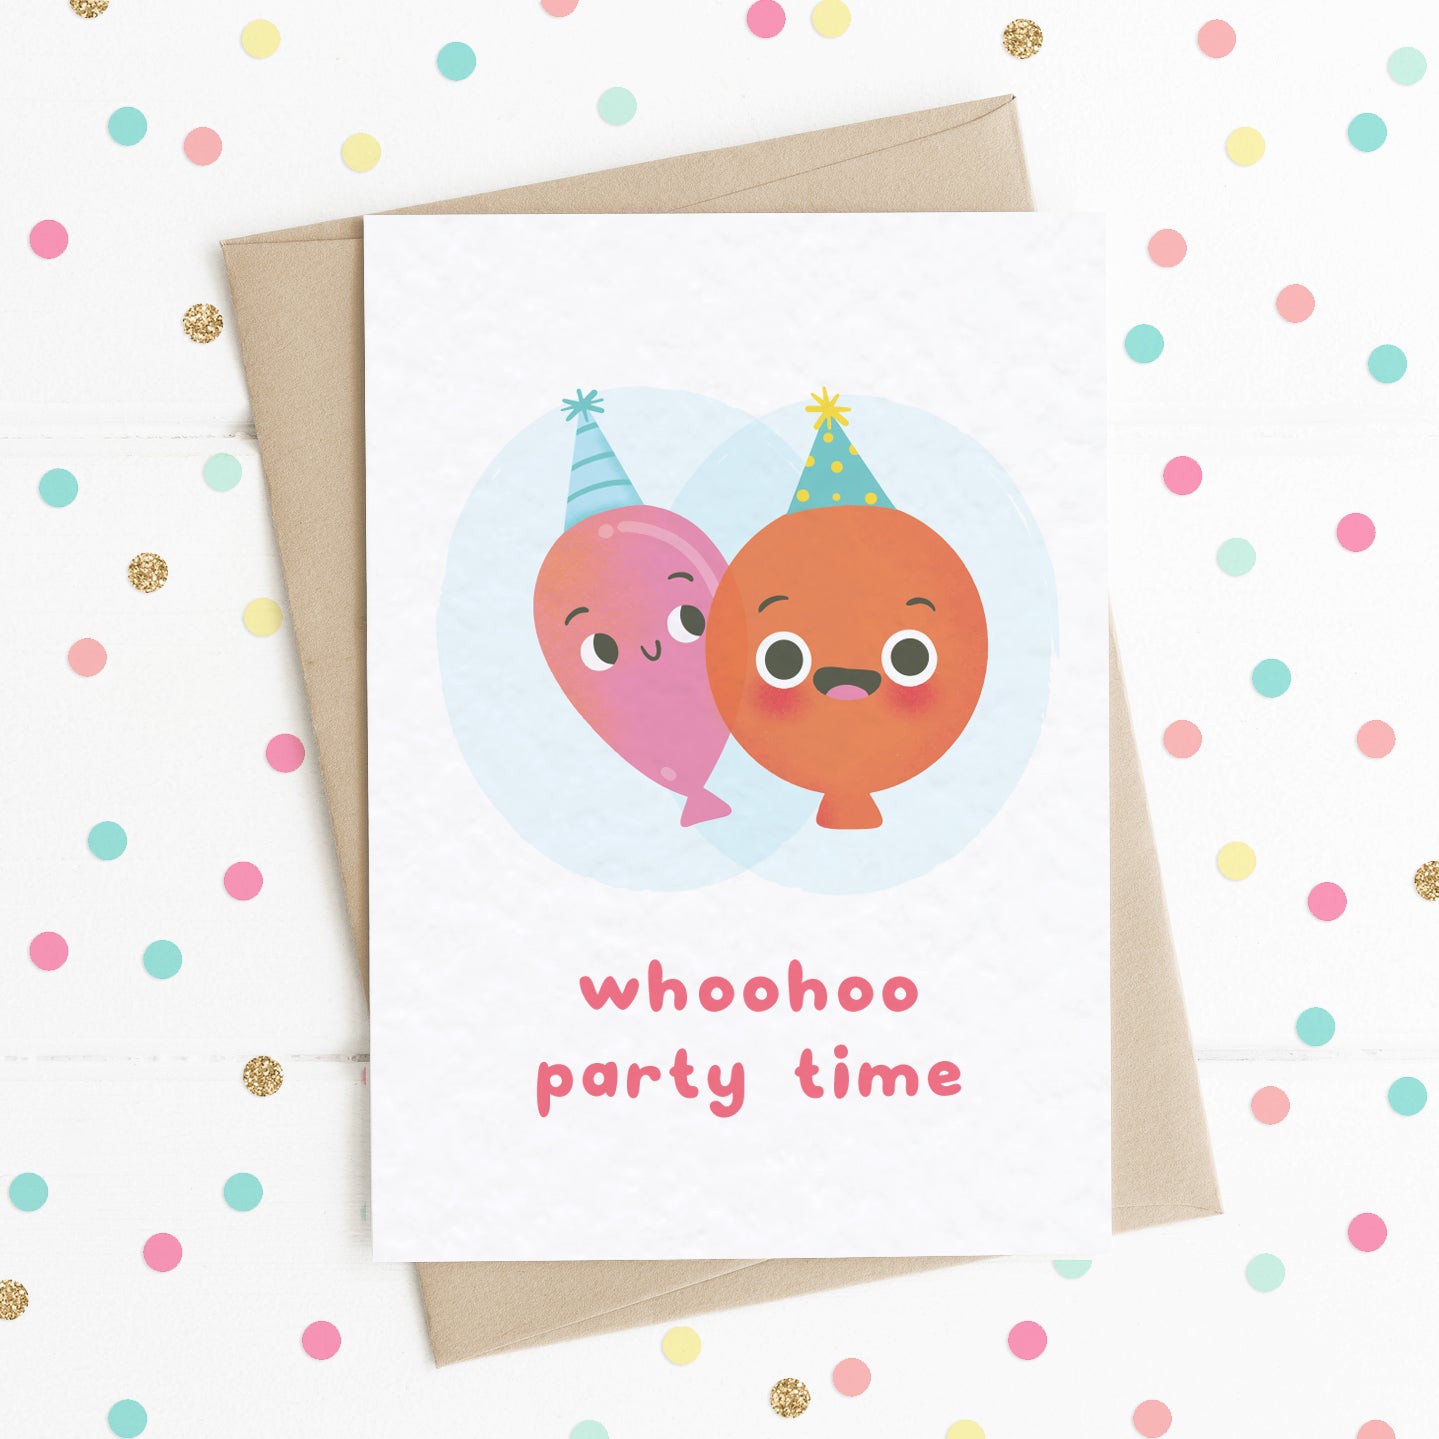 A fun birthday card with two smiling happy balloons with party hats on and the message "Whoohoo Party Time".